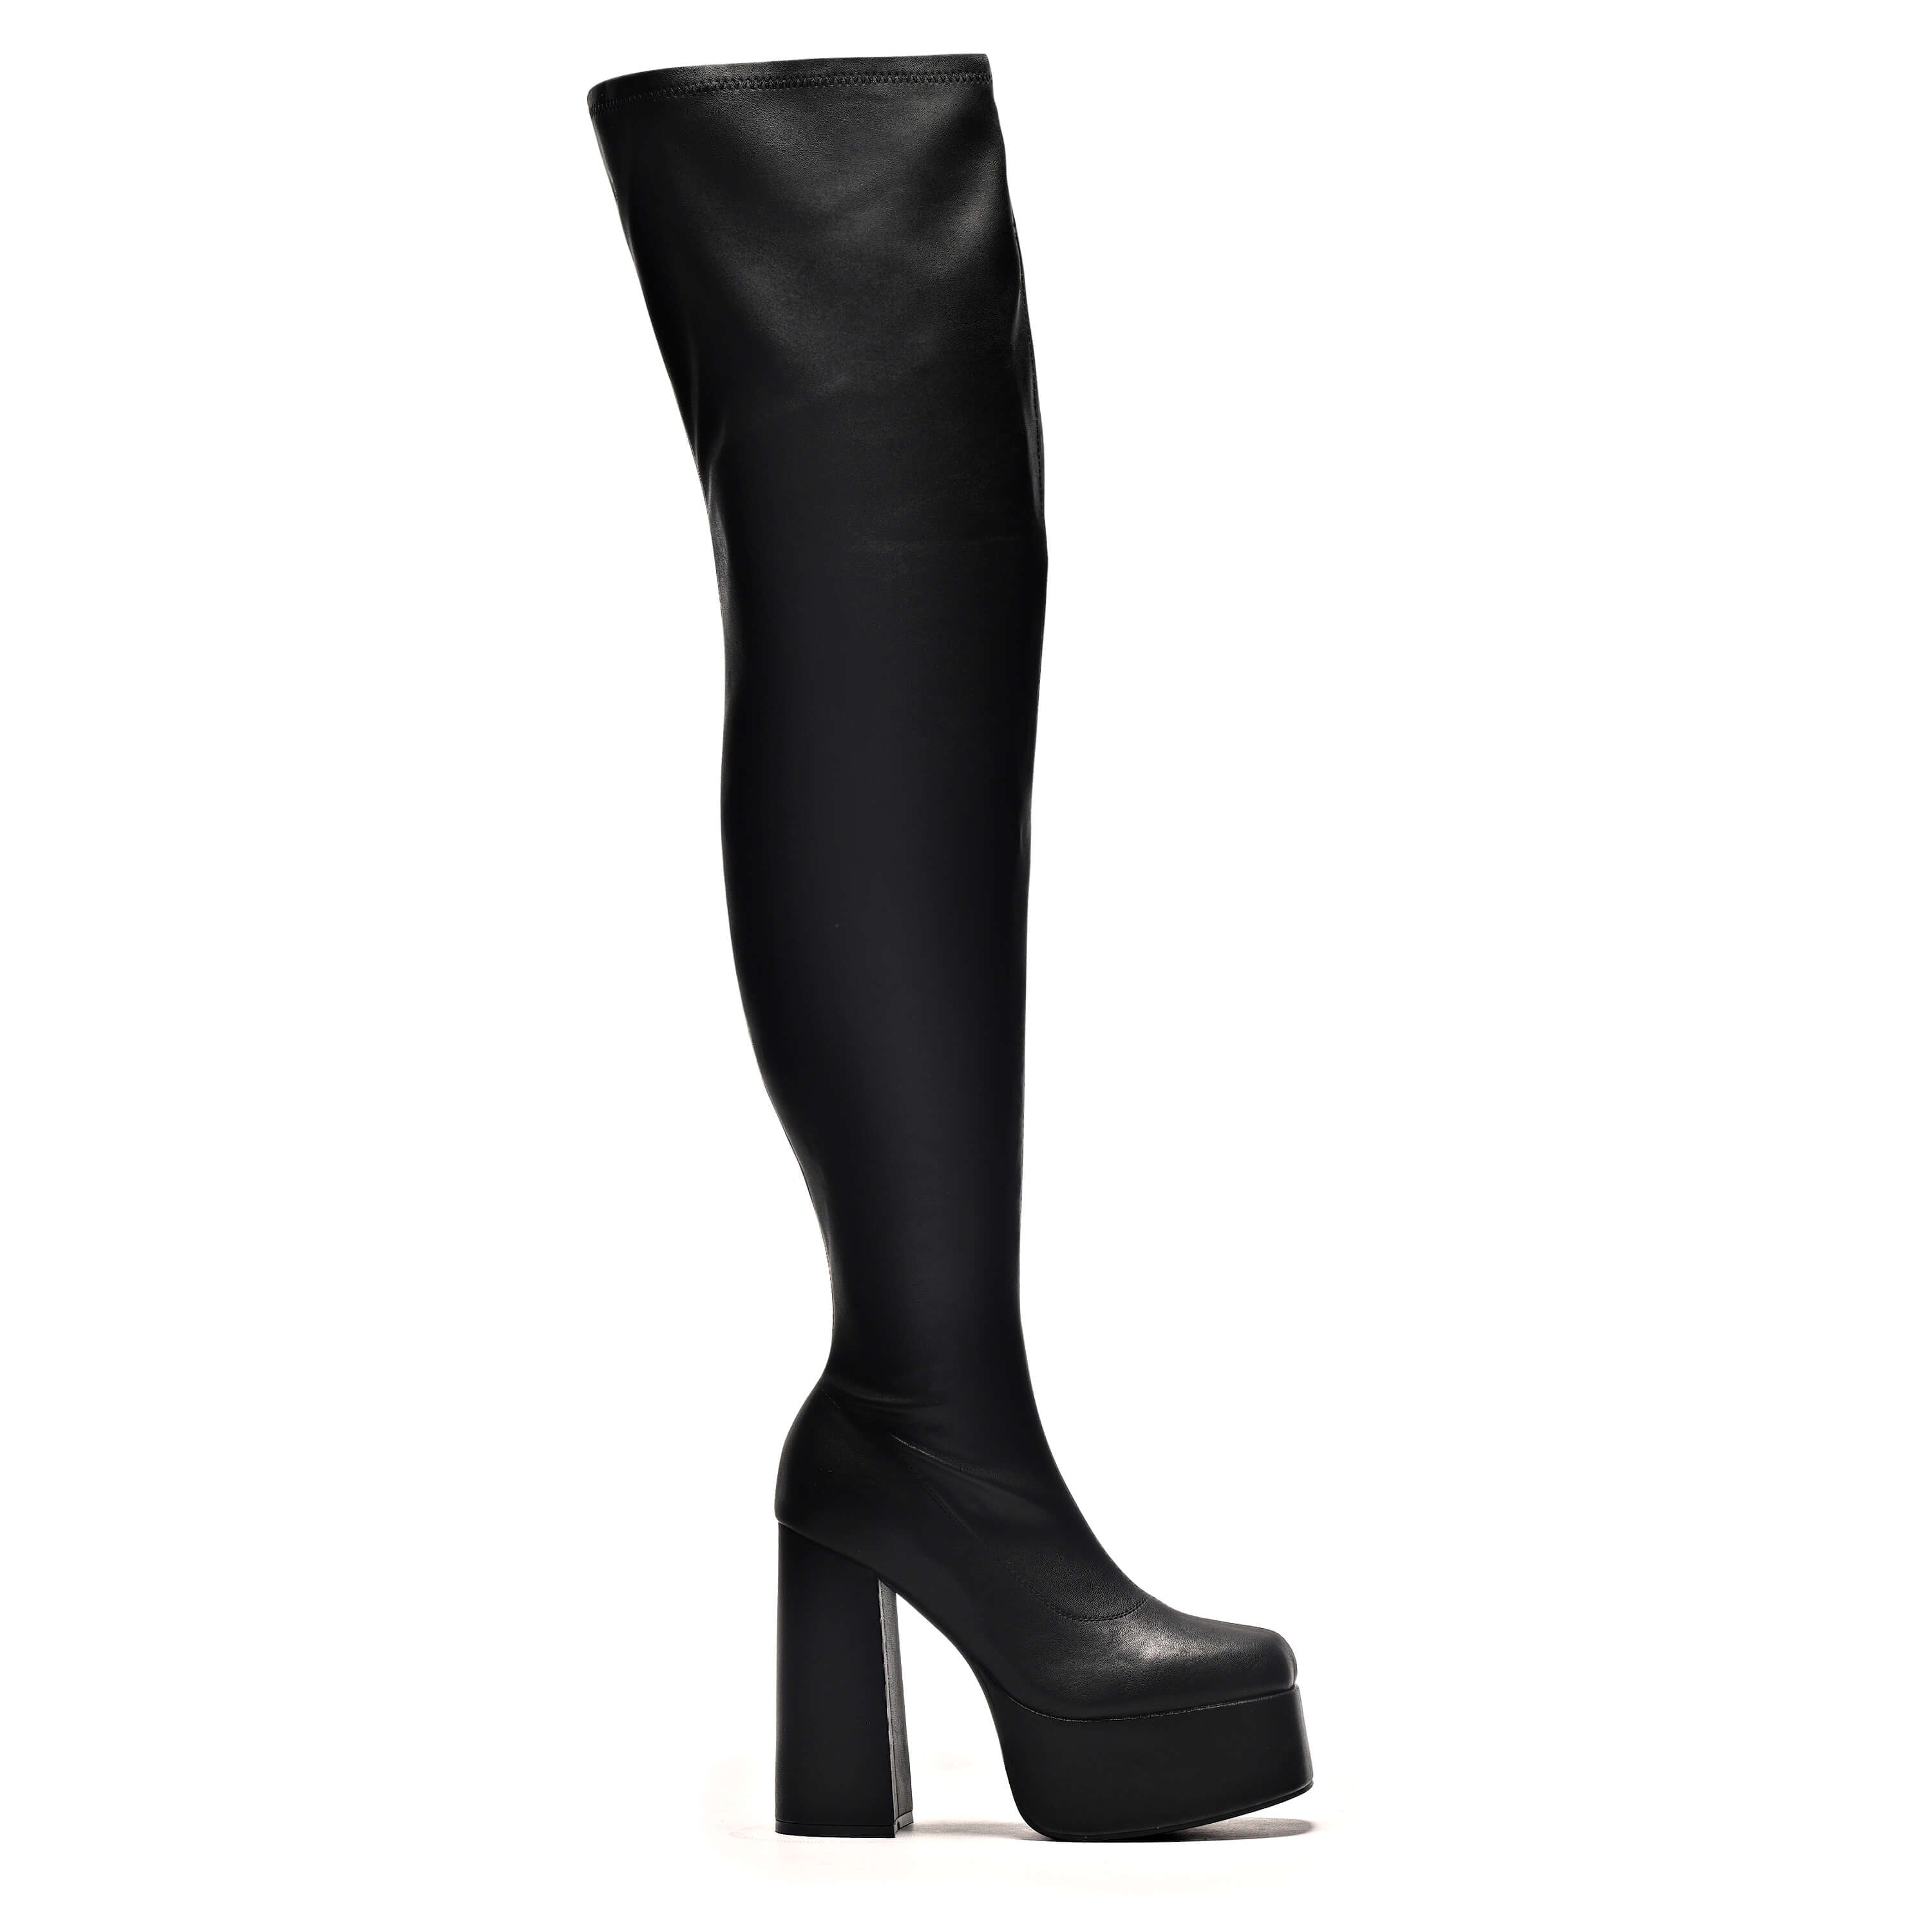 The Redemption Stretch Thigh High Boots – KOI footwear